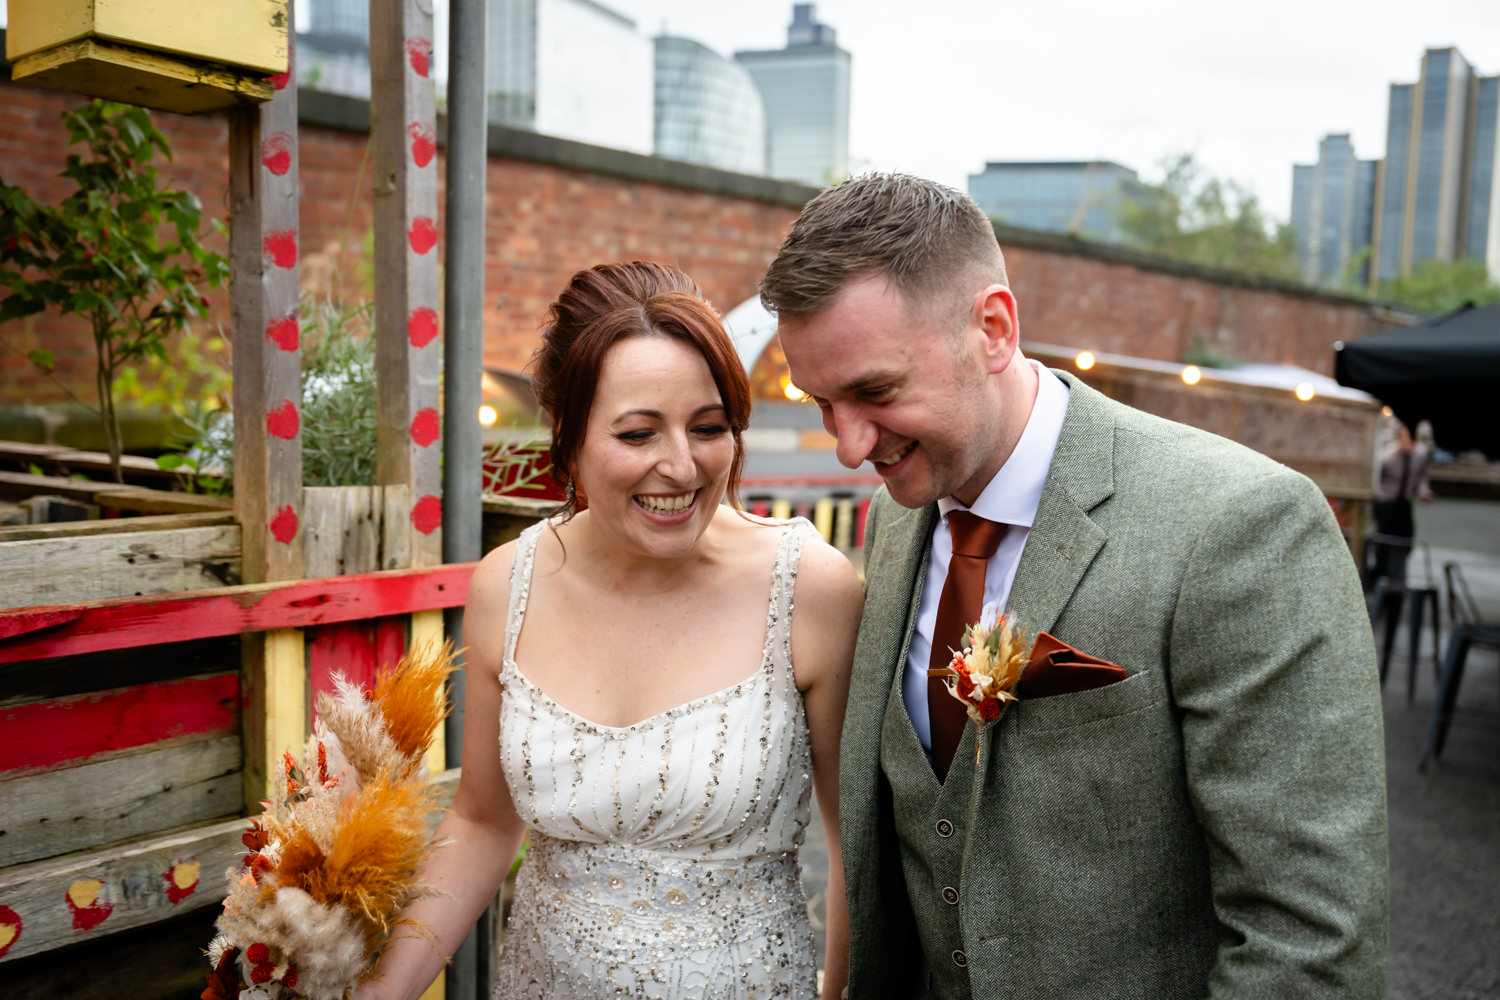 Relaxed wedding portrait photos at Grub Manchester